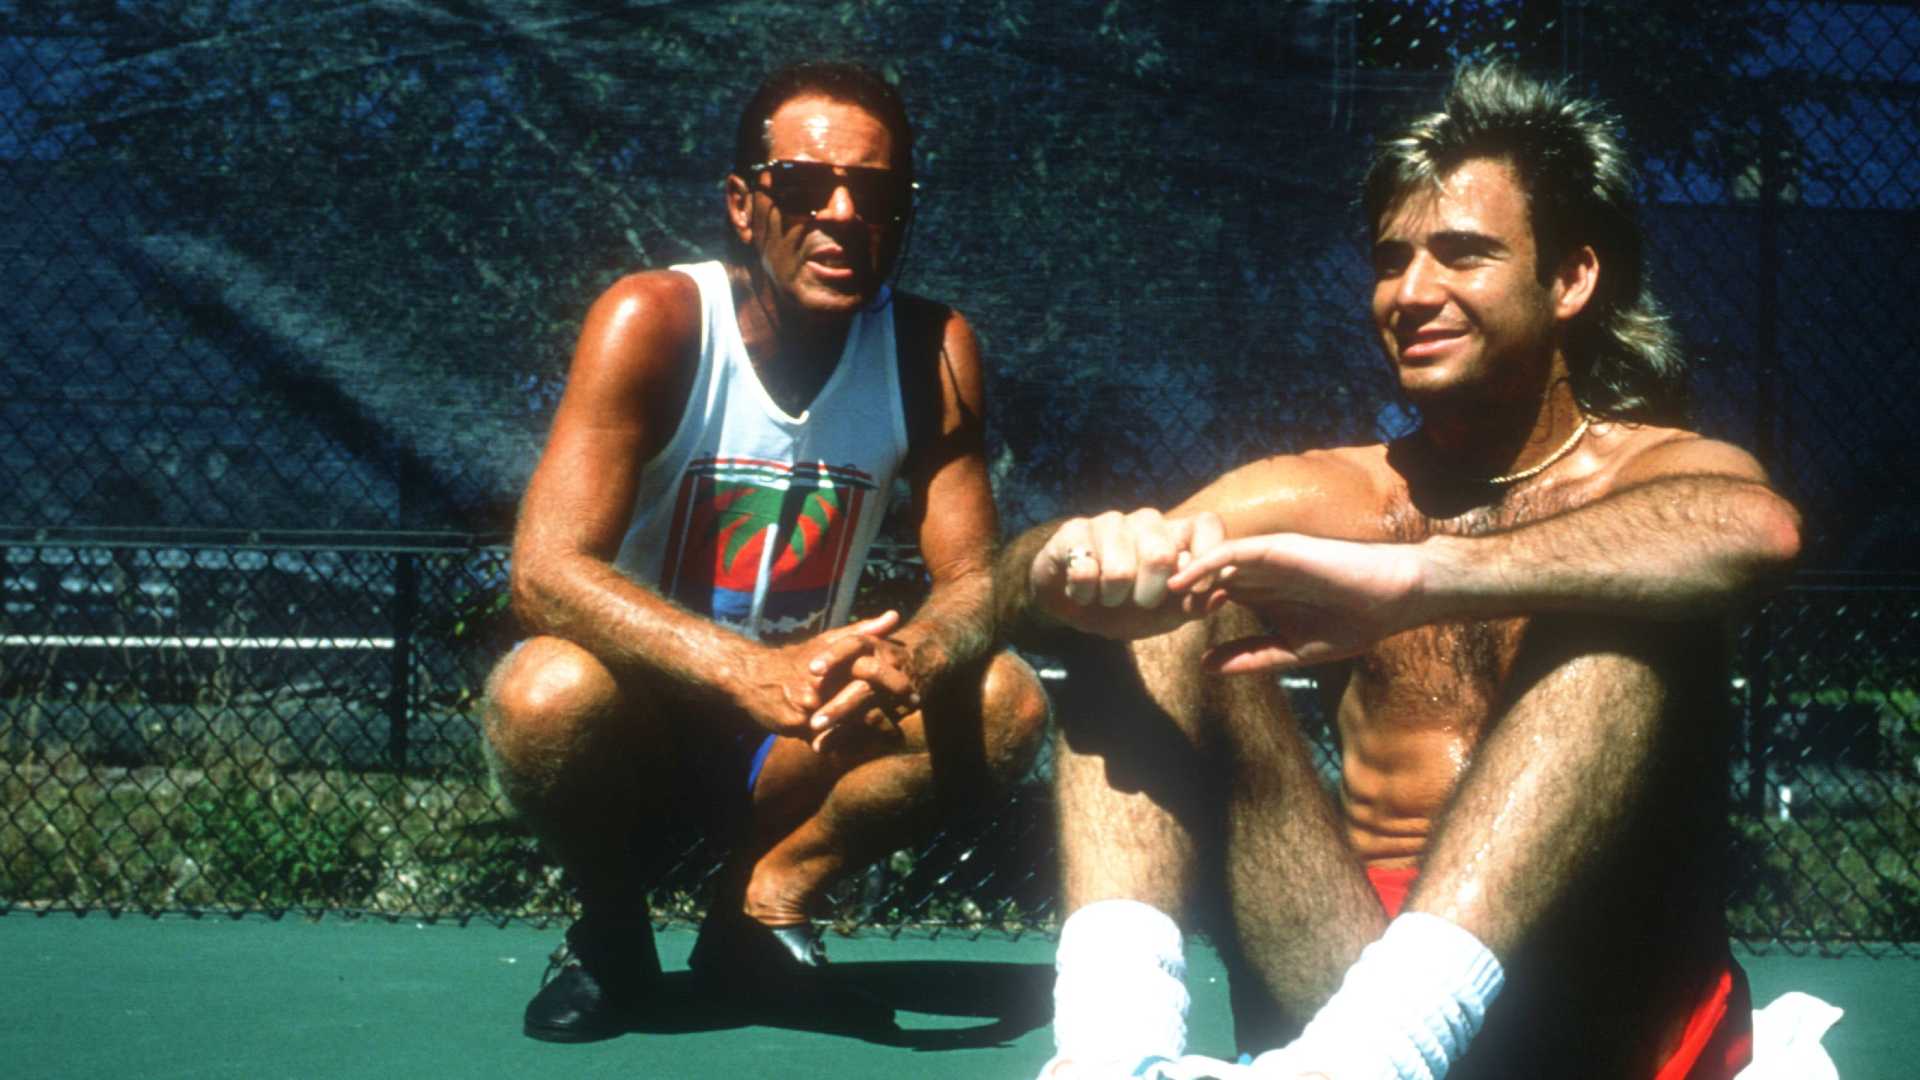 Nick Bollettieri and Andre Agassi in 1990.